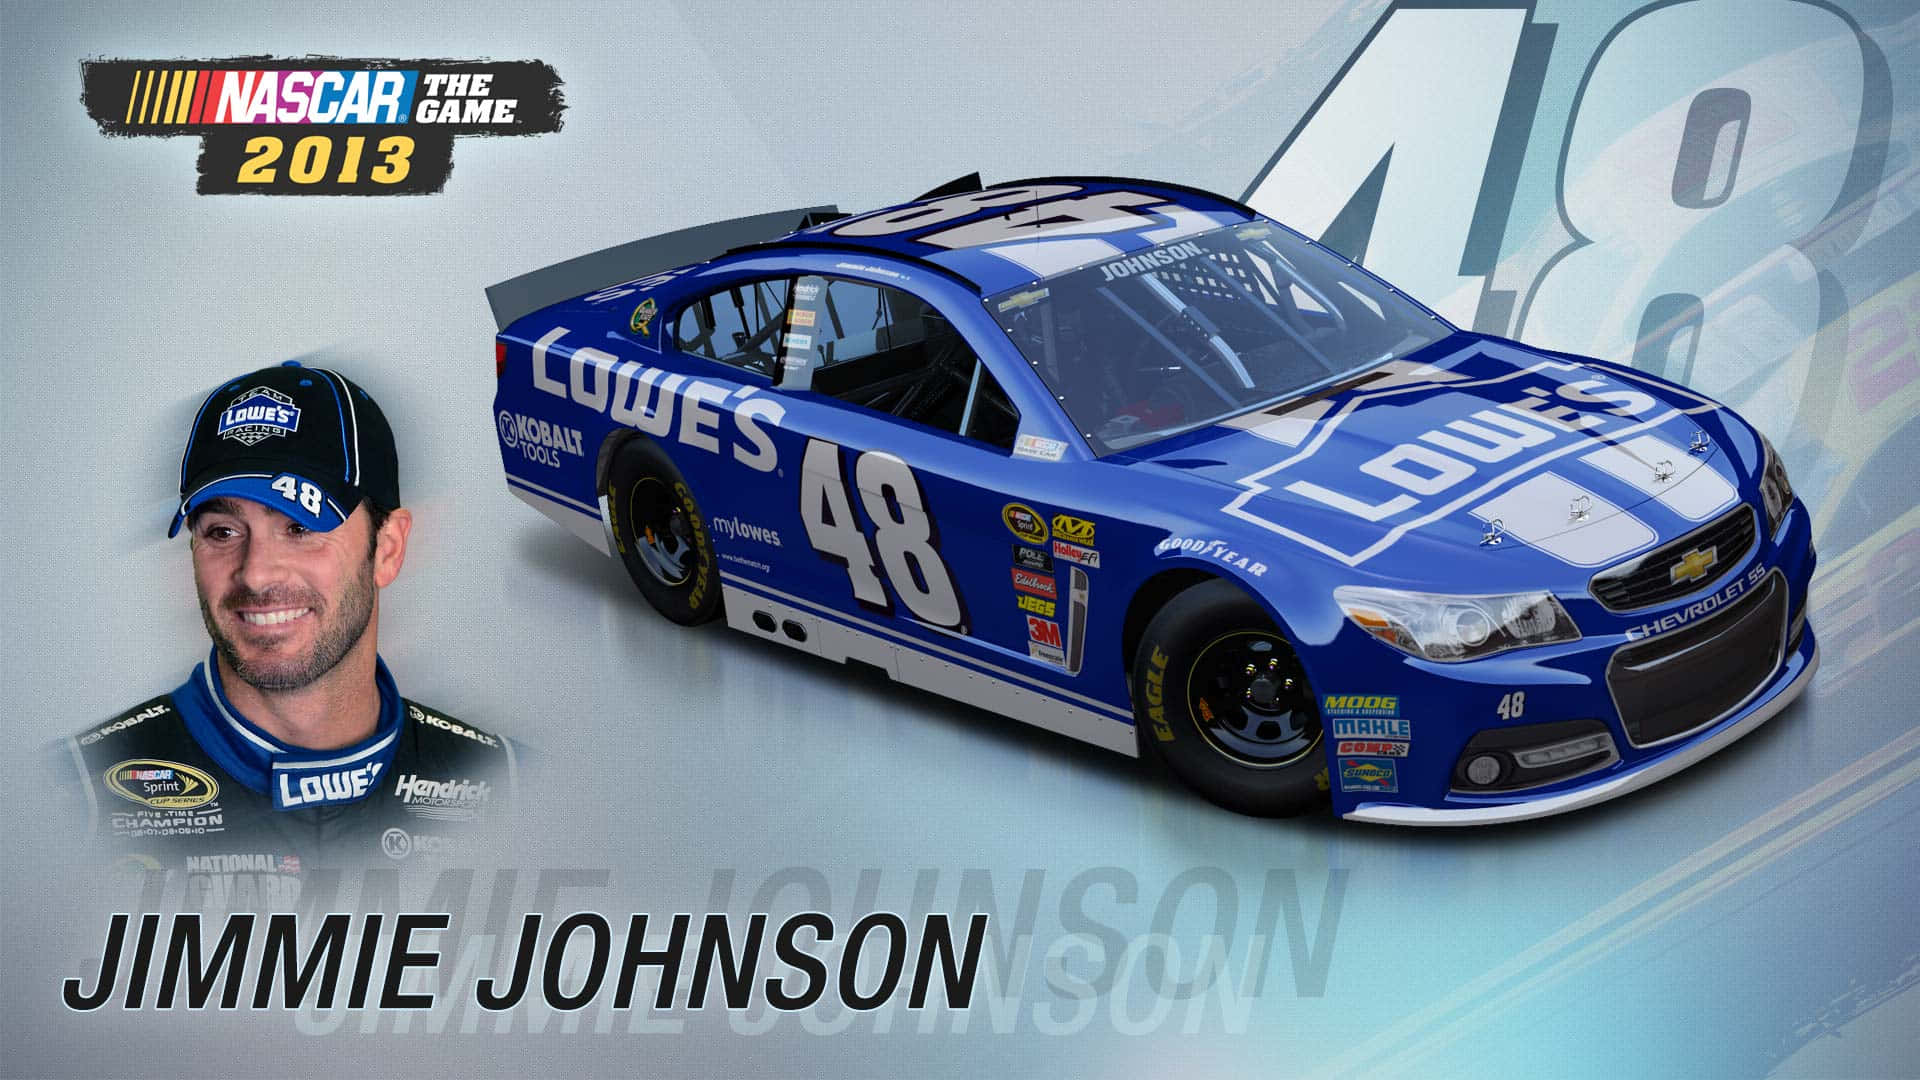 Jimmie Johnson focused and ready in his racing gear. Wallpaper